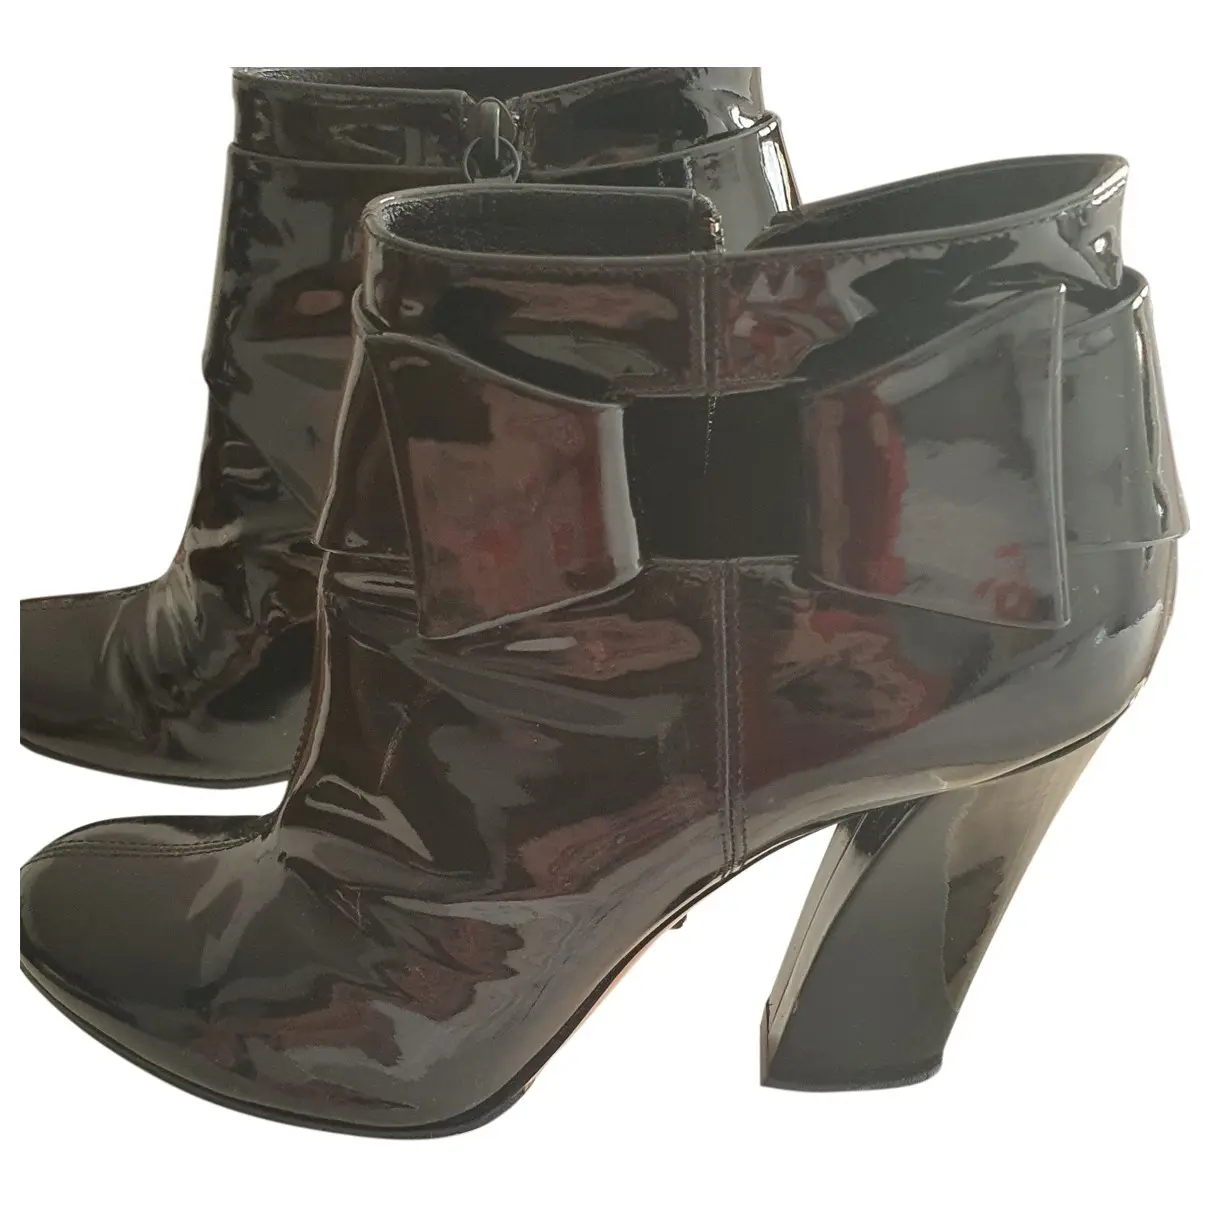 Patent leather ankle boots Casadei